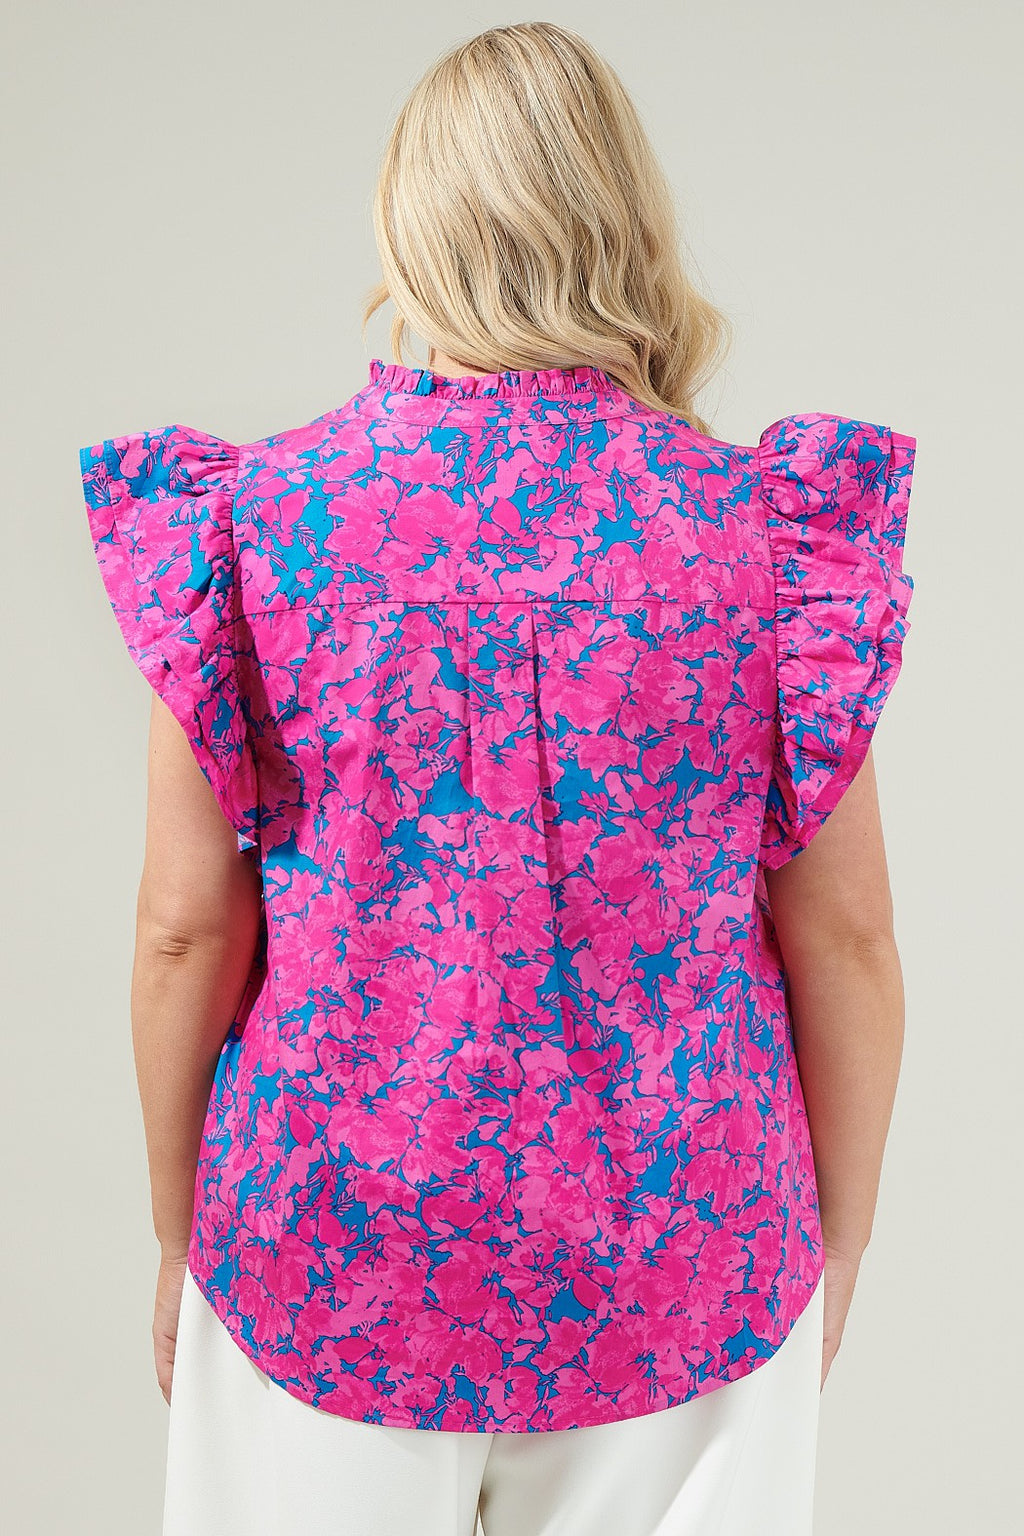 Lucy Lou Floral Ruffle Top